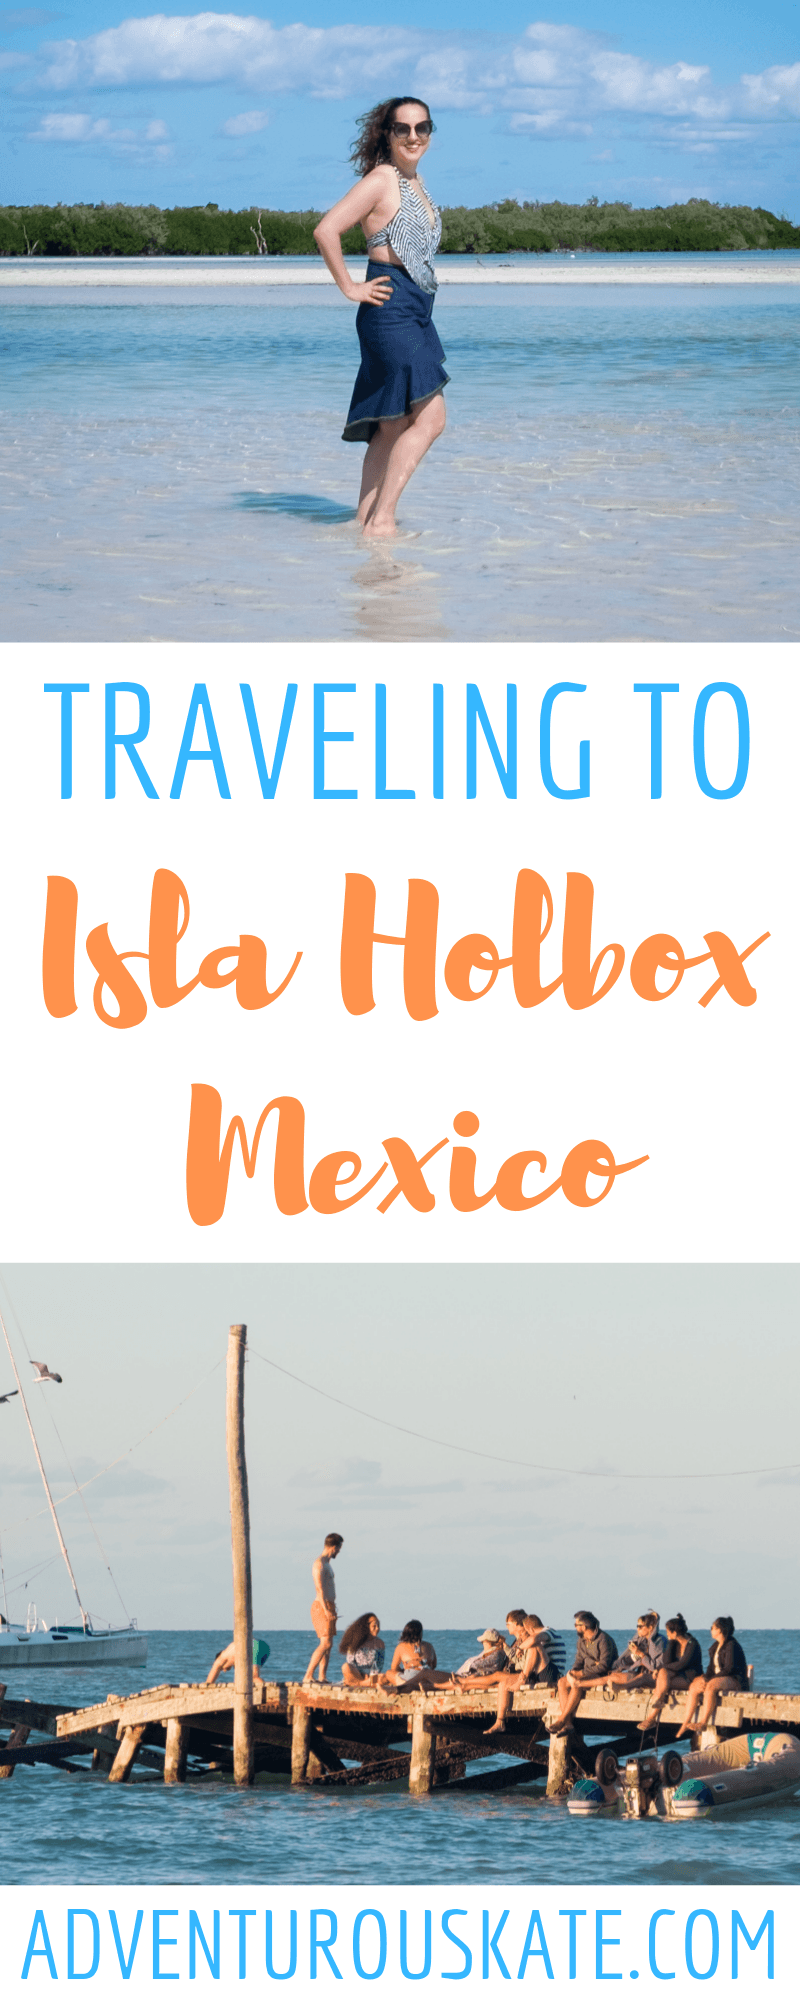 Collage of Holbox Mexico beach photos - image for Pinterest.